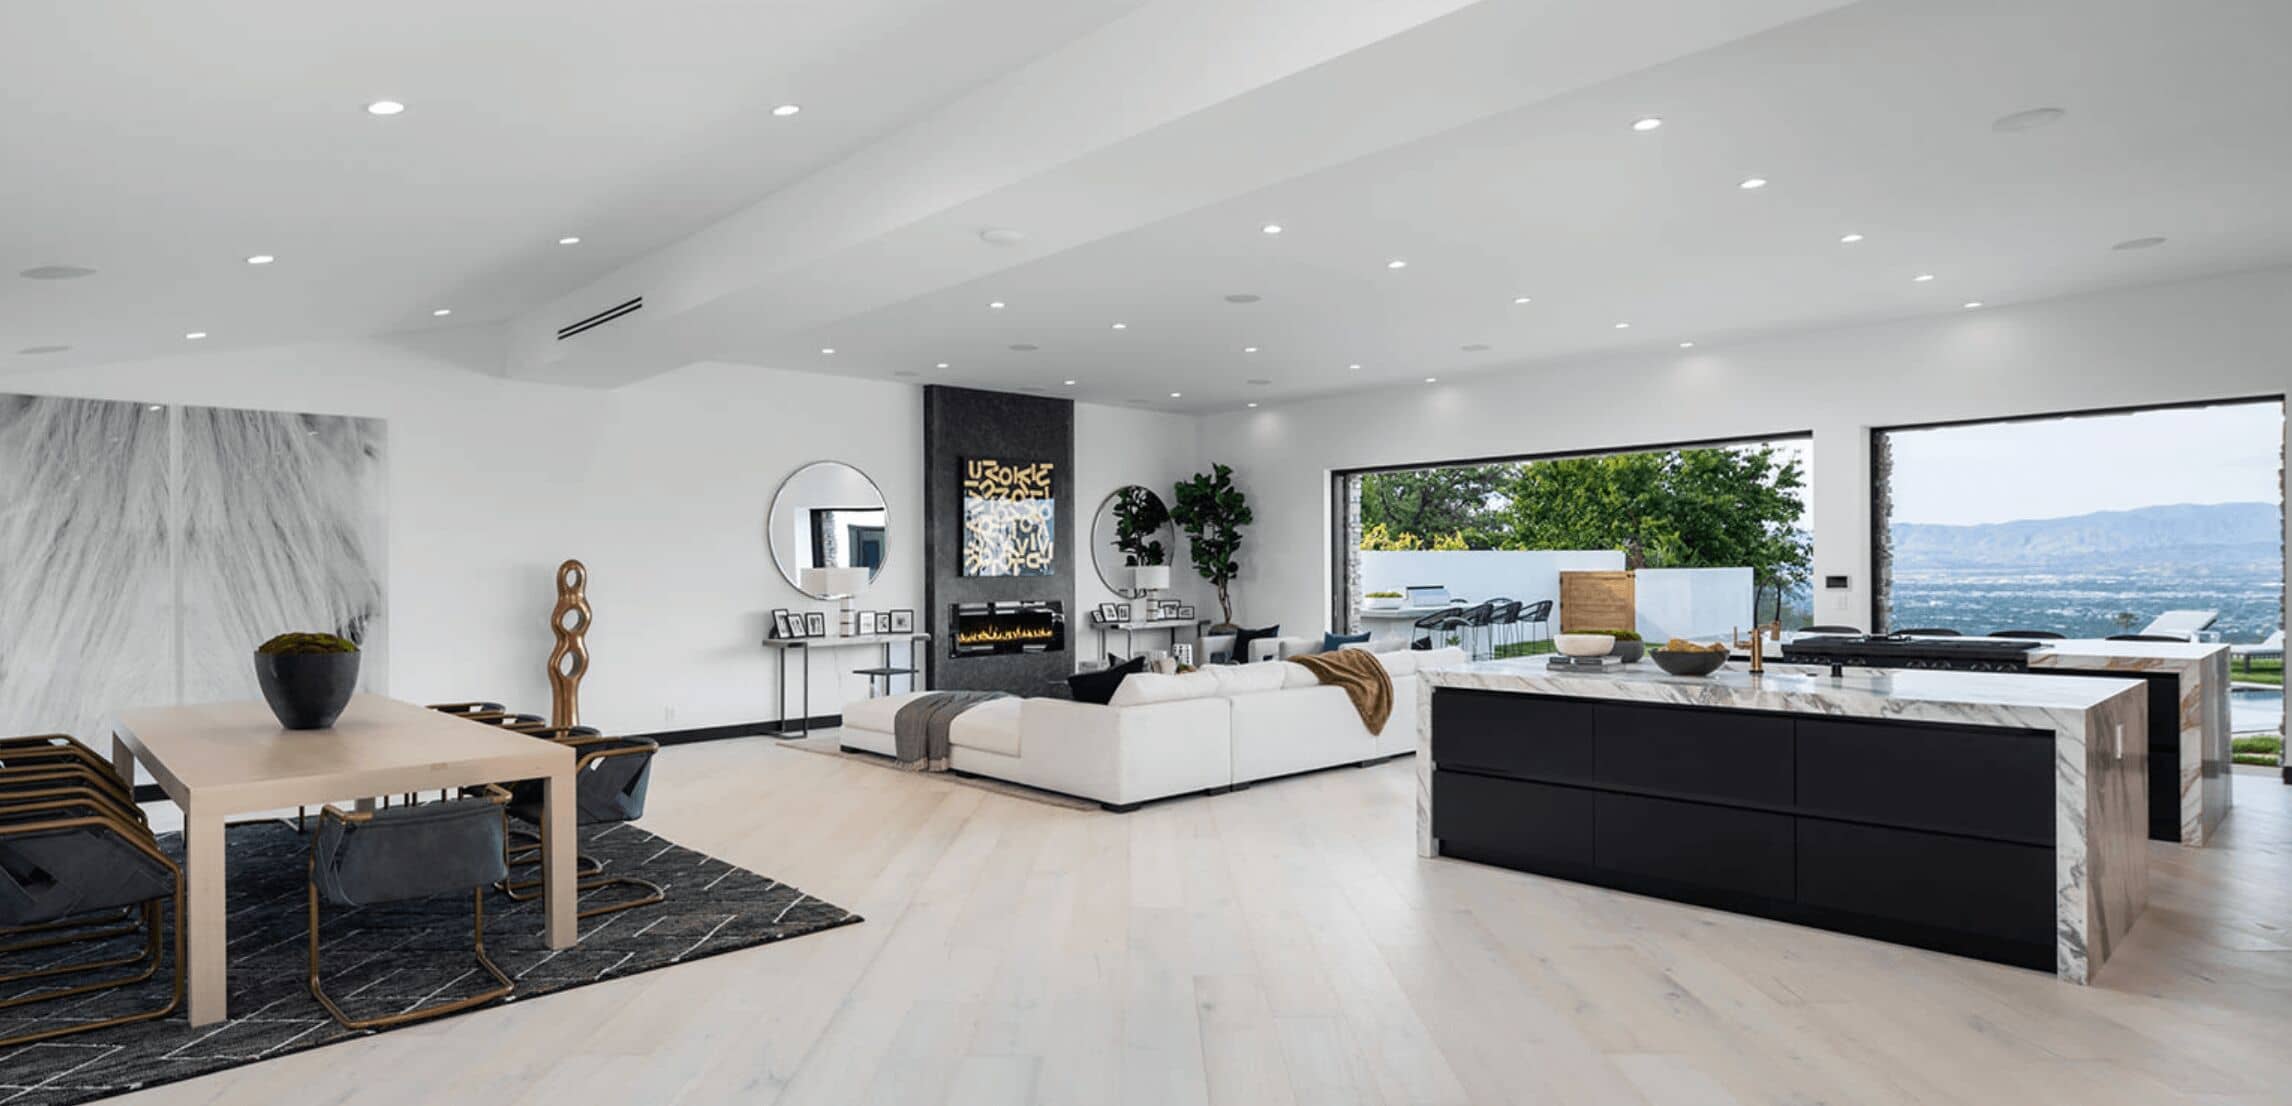 Open interior of a home designed by an architect in Orange County CA.